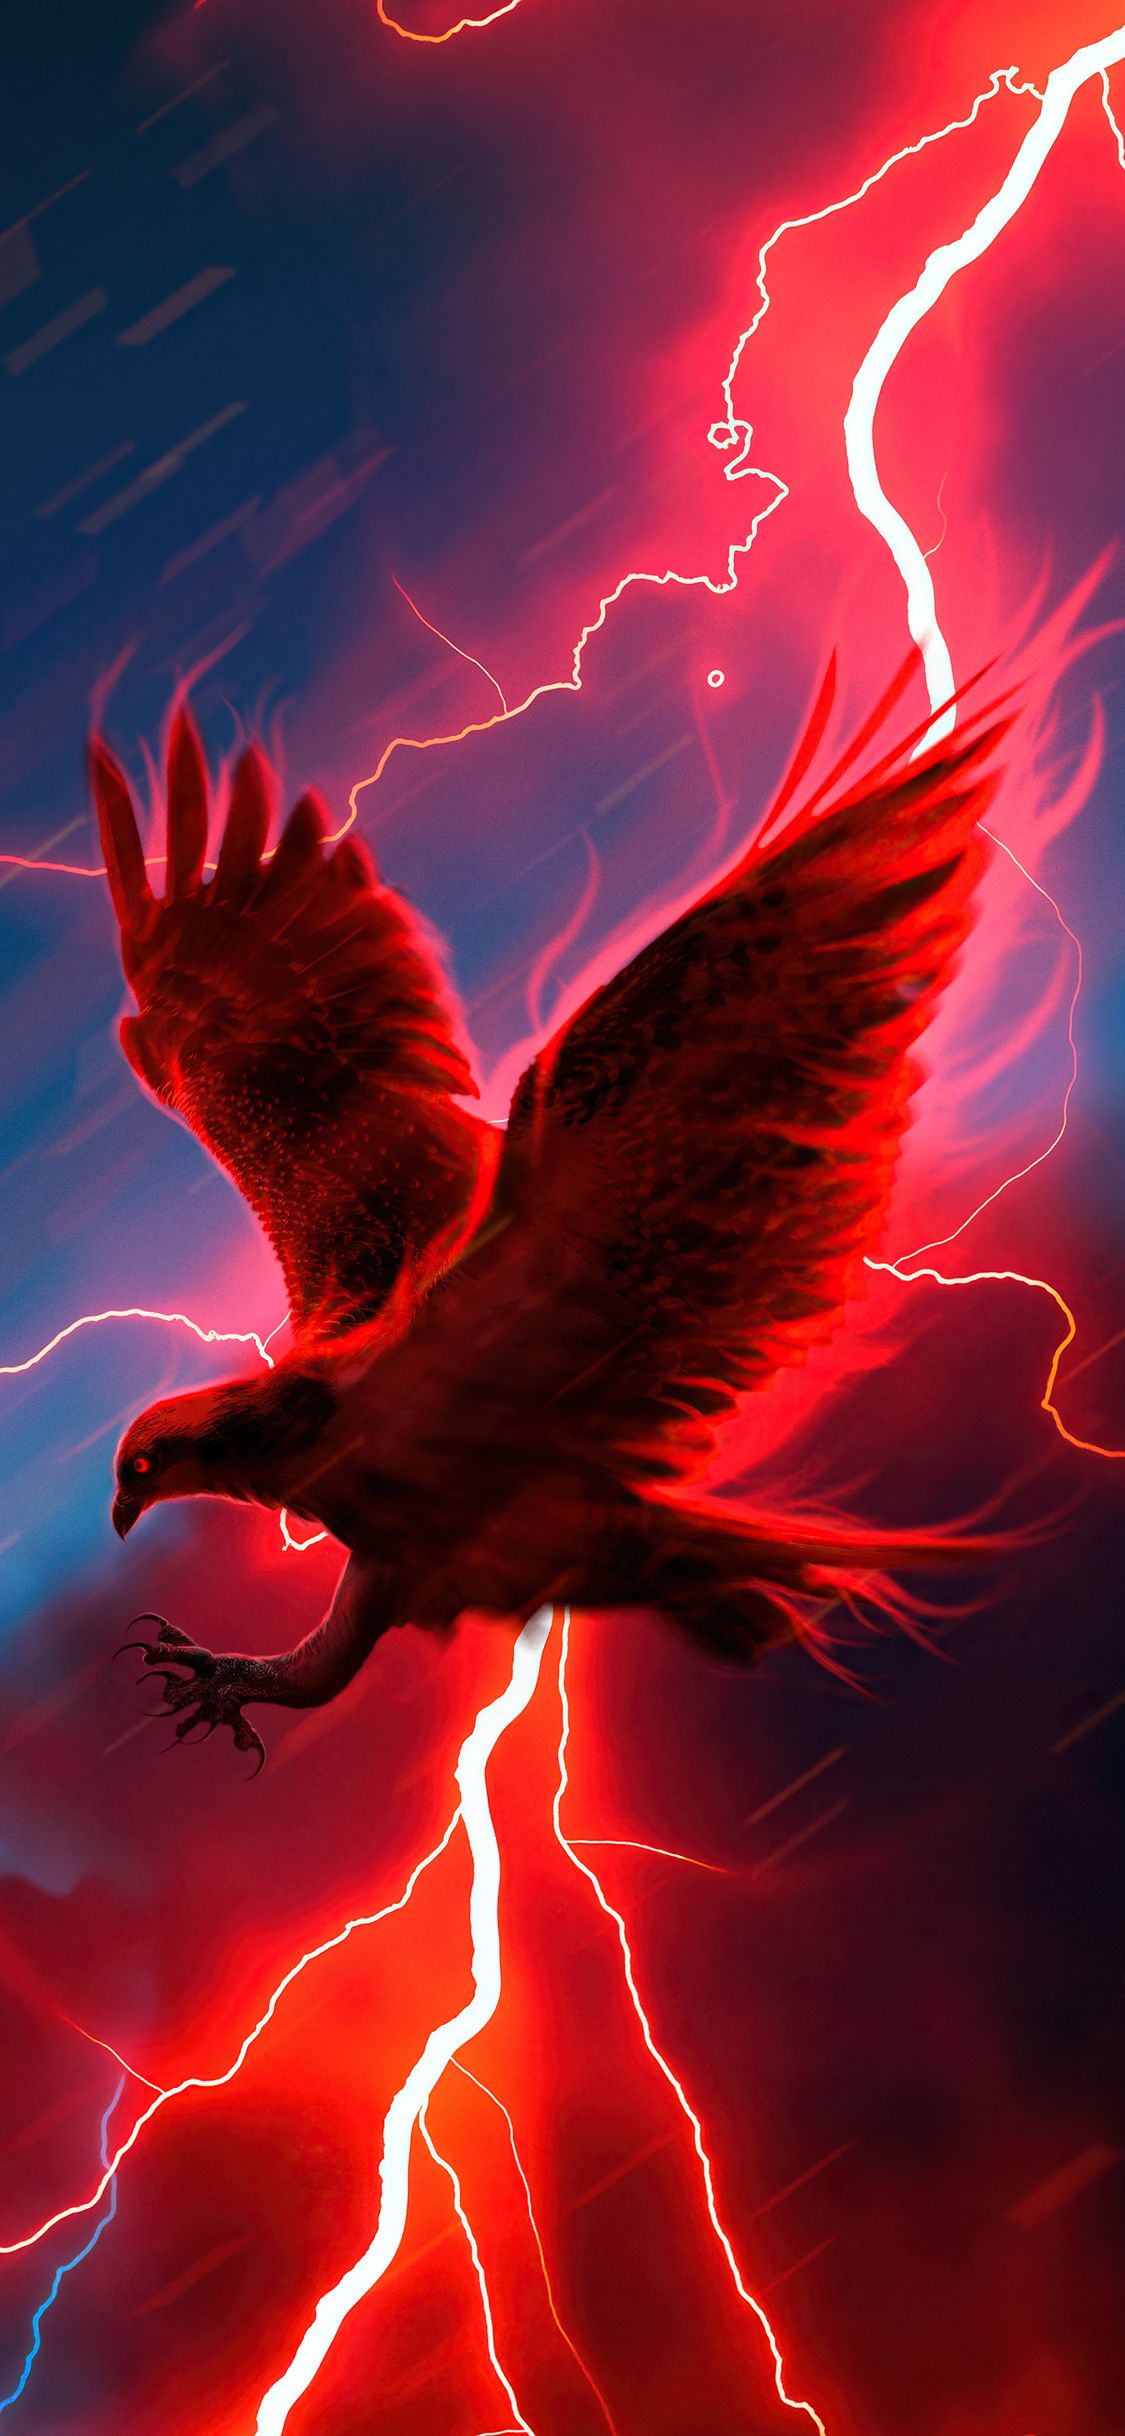 Eagle Struck By Lightning 4k iPhone XS, iPhone iPhone X HD 4k Wallpaper, Image, Background, Photo and Picture